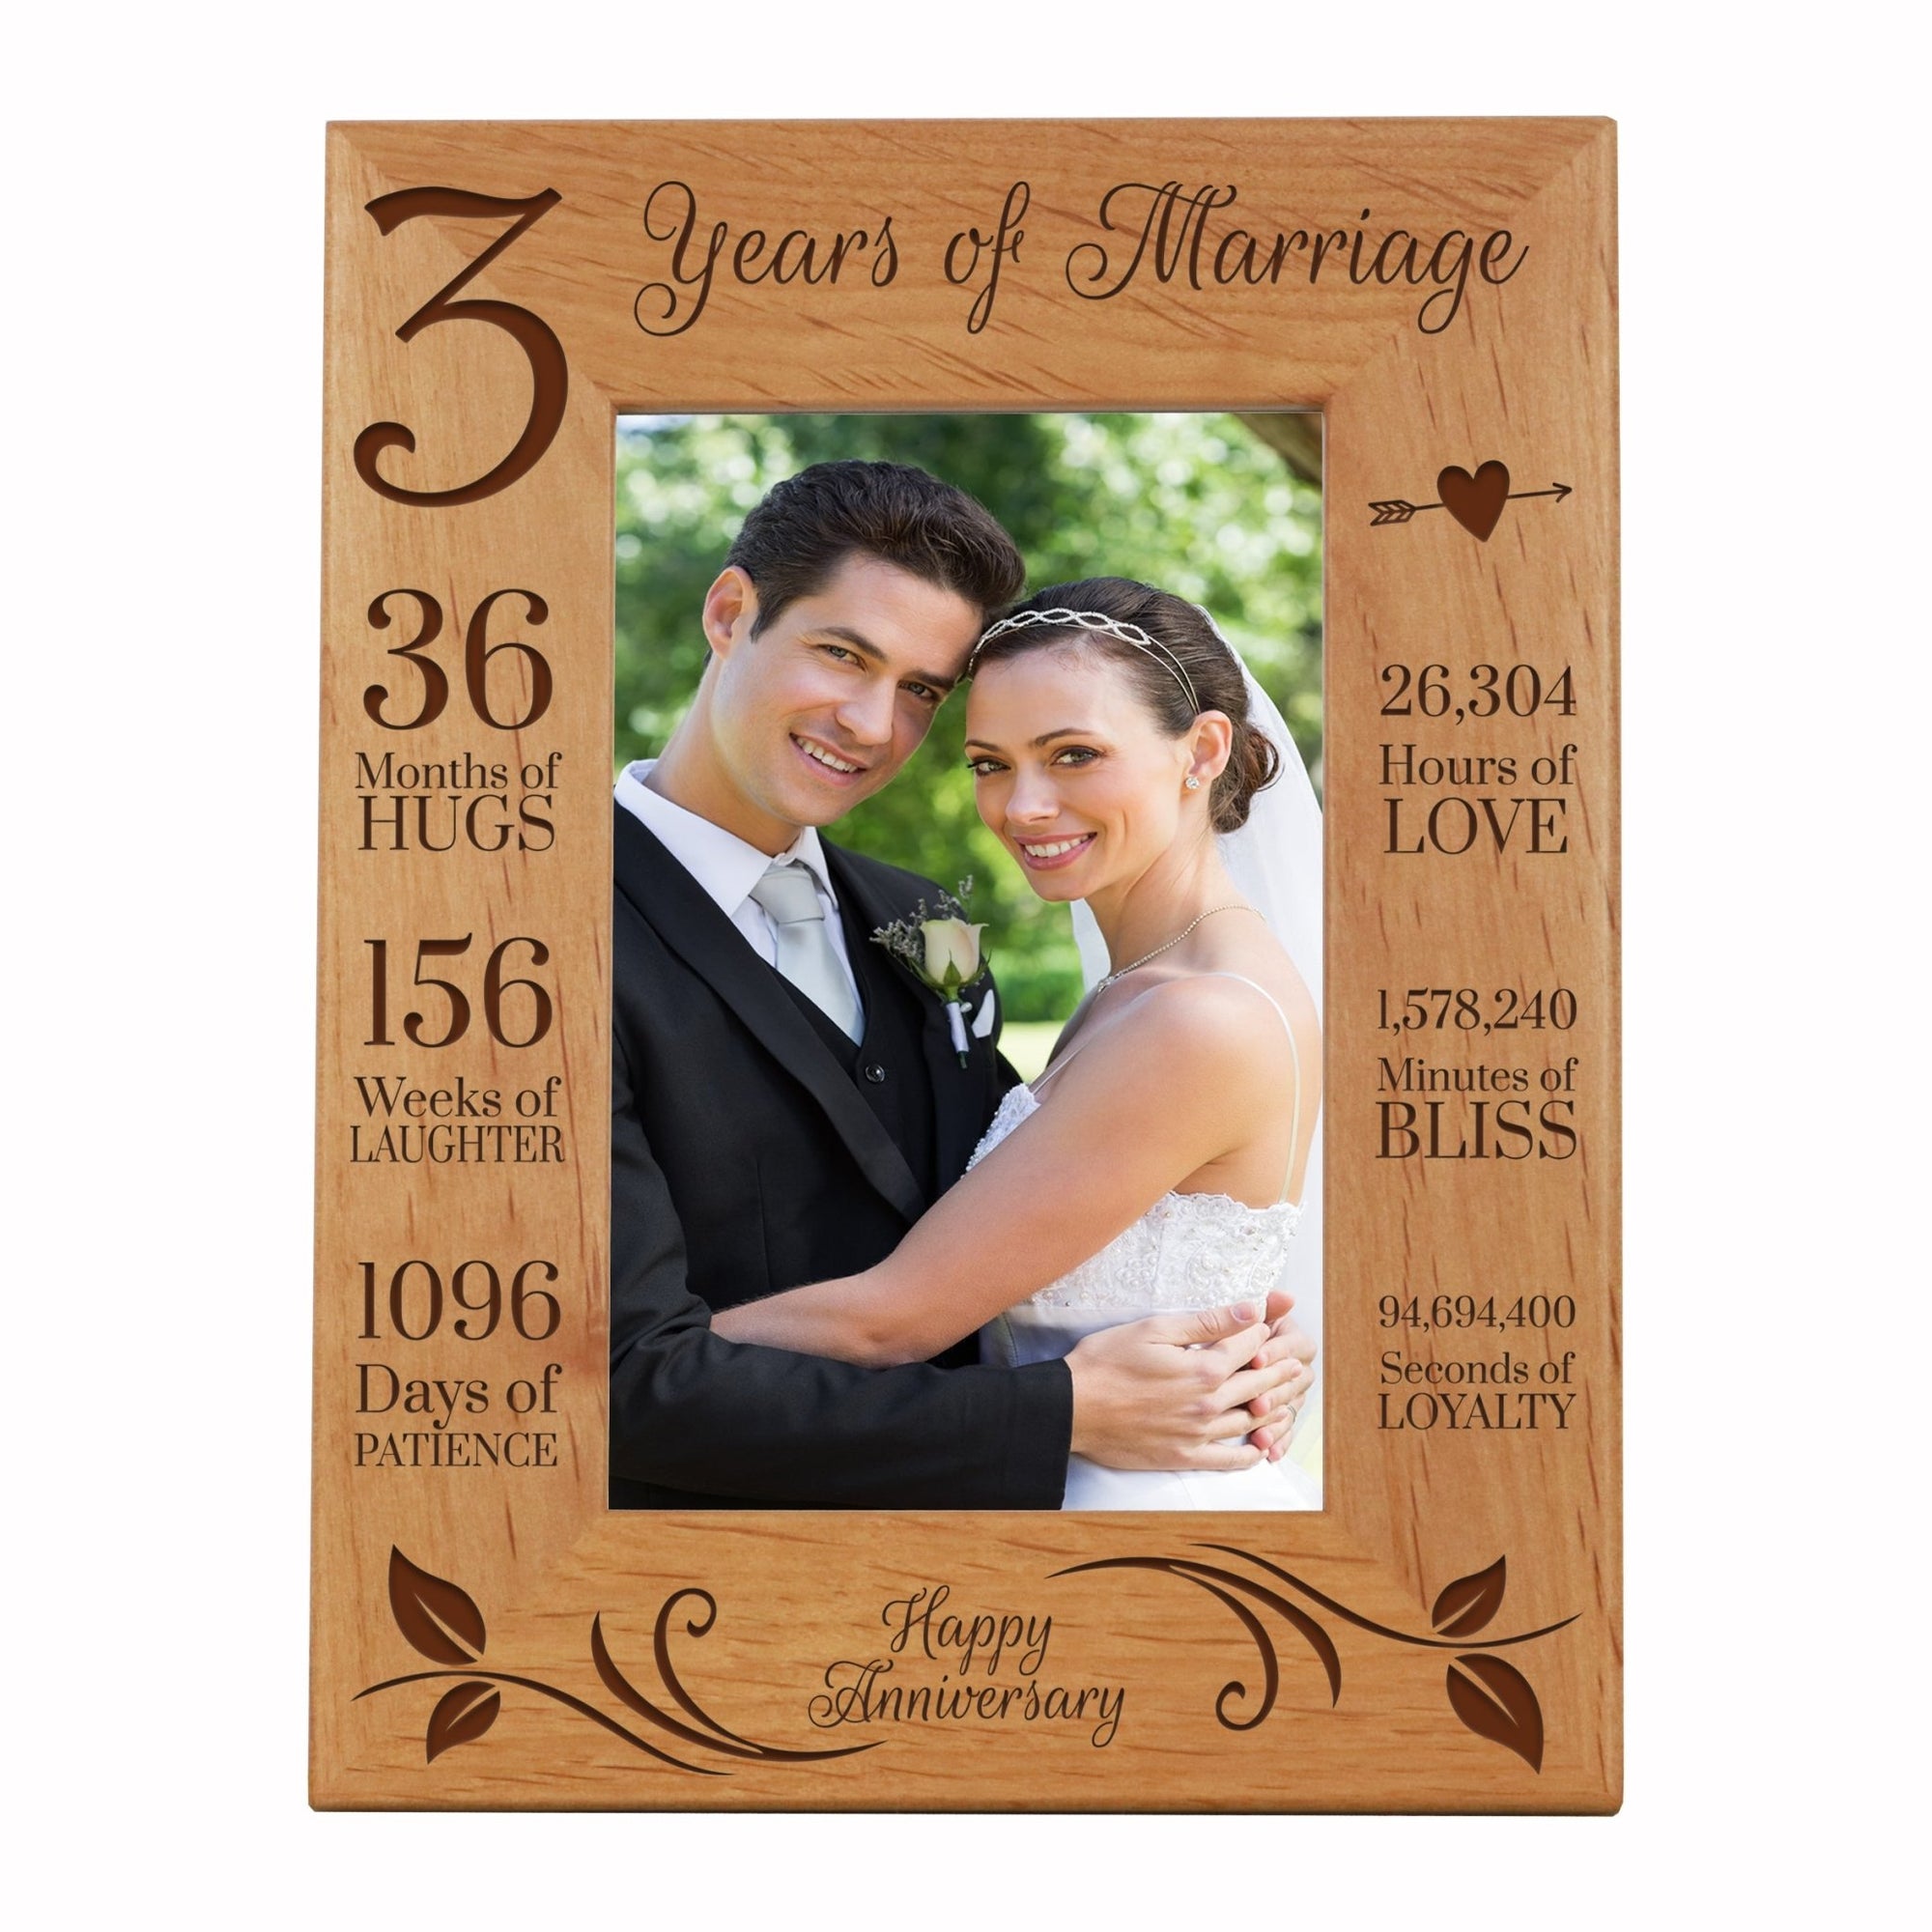 Lifesong Milestones Engraved 3rd Anniversary Picture Frame Gift for Couples